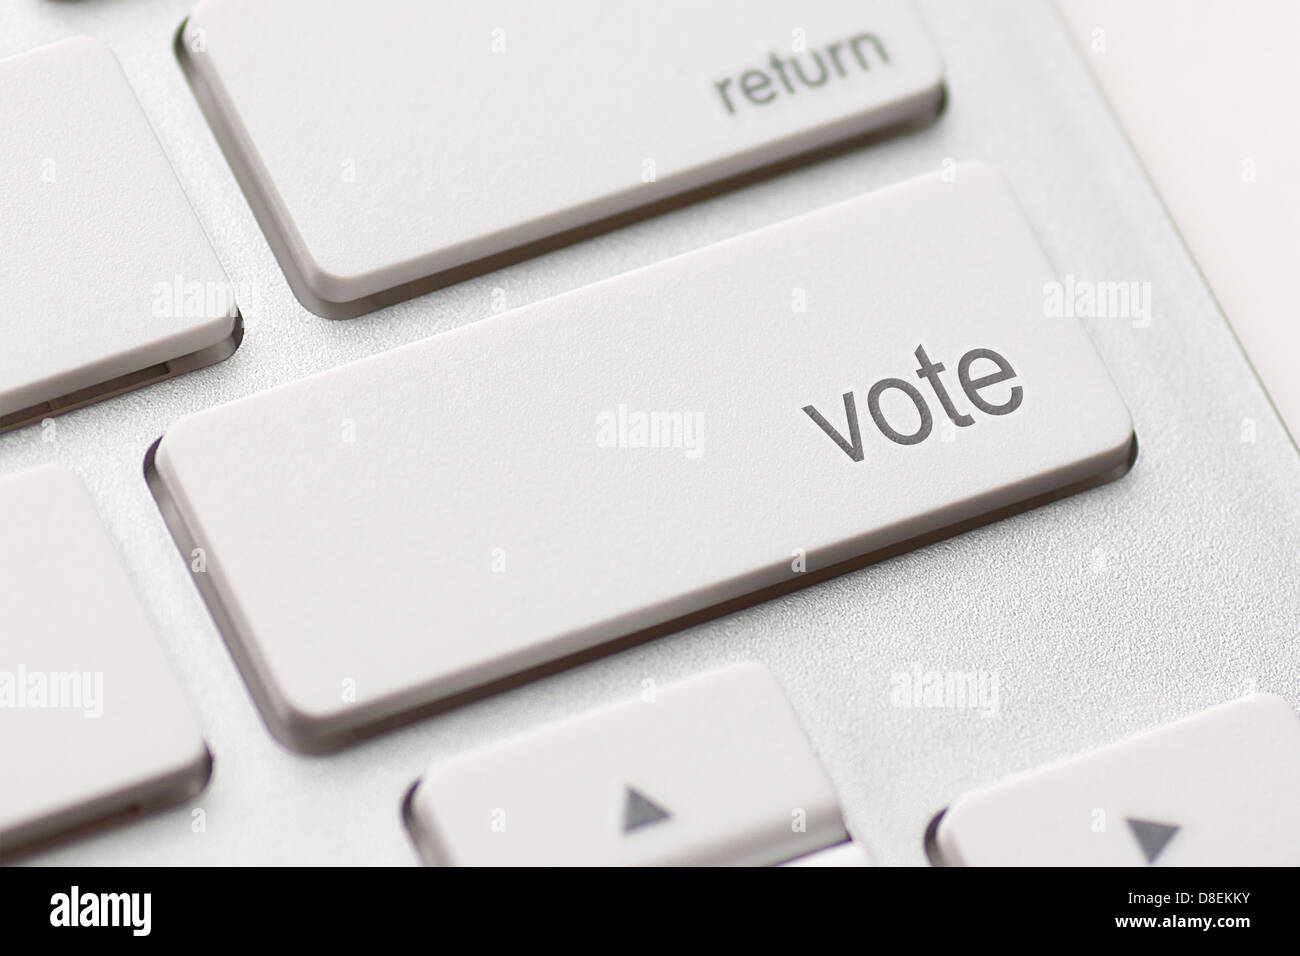 democracy concept with vote button on keyboard Stock Photo